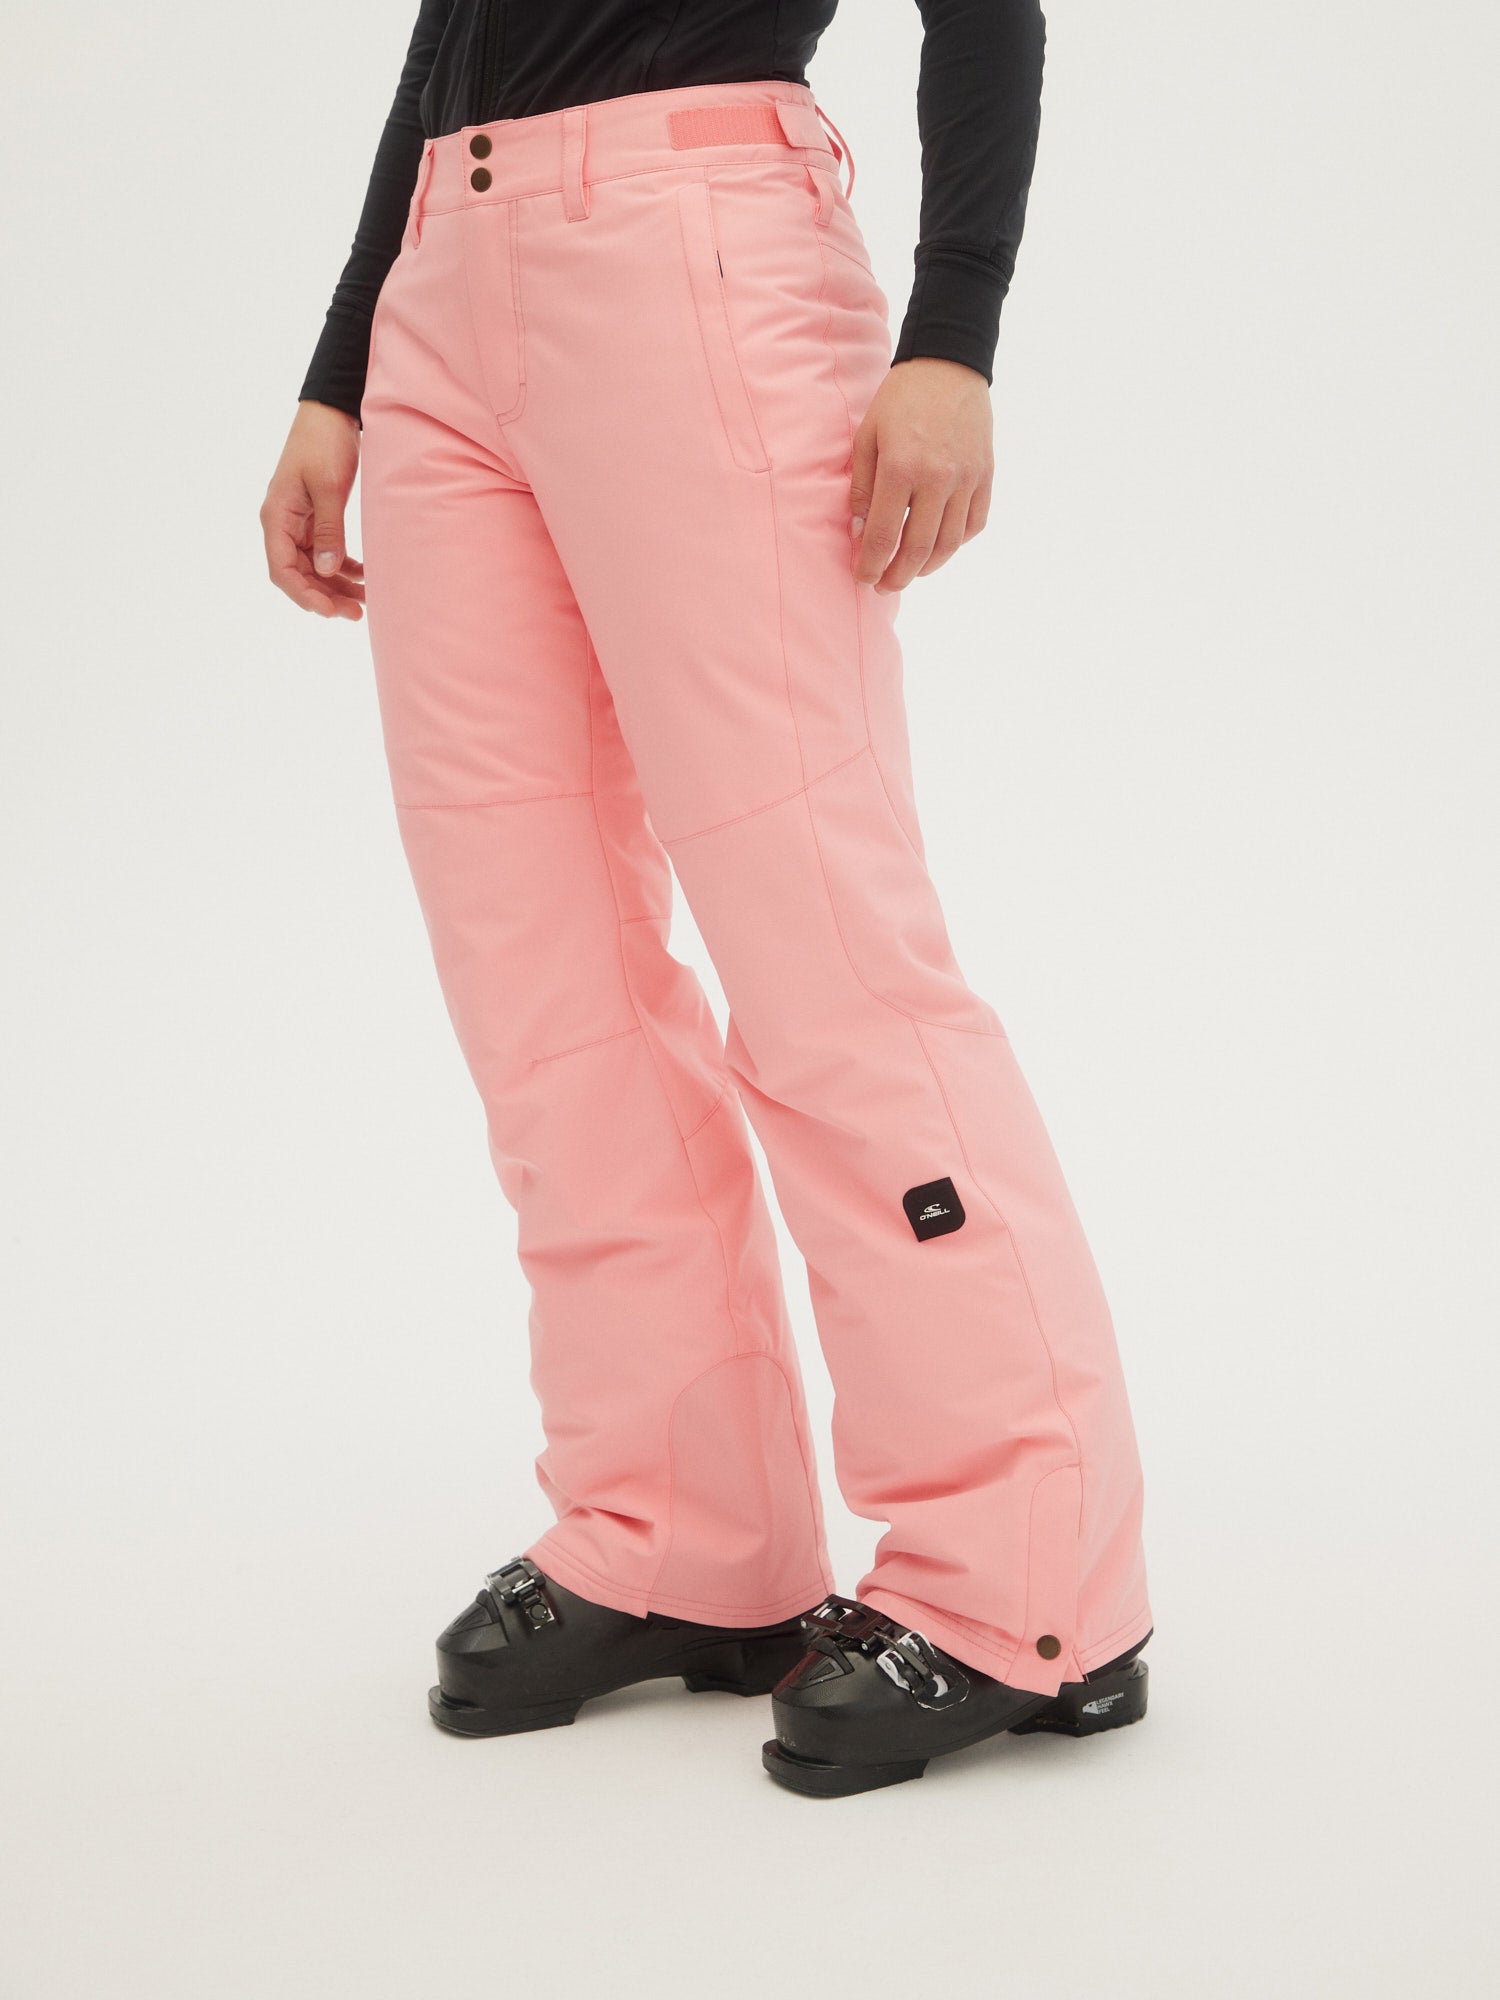 Women with Control Petite Prime Stretch Sailor Pants w/ Eyelet Detail Pink  PM A3